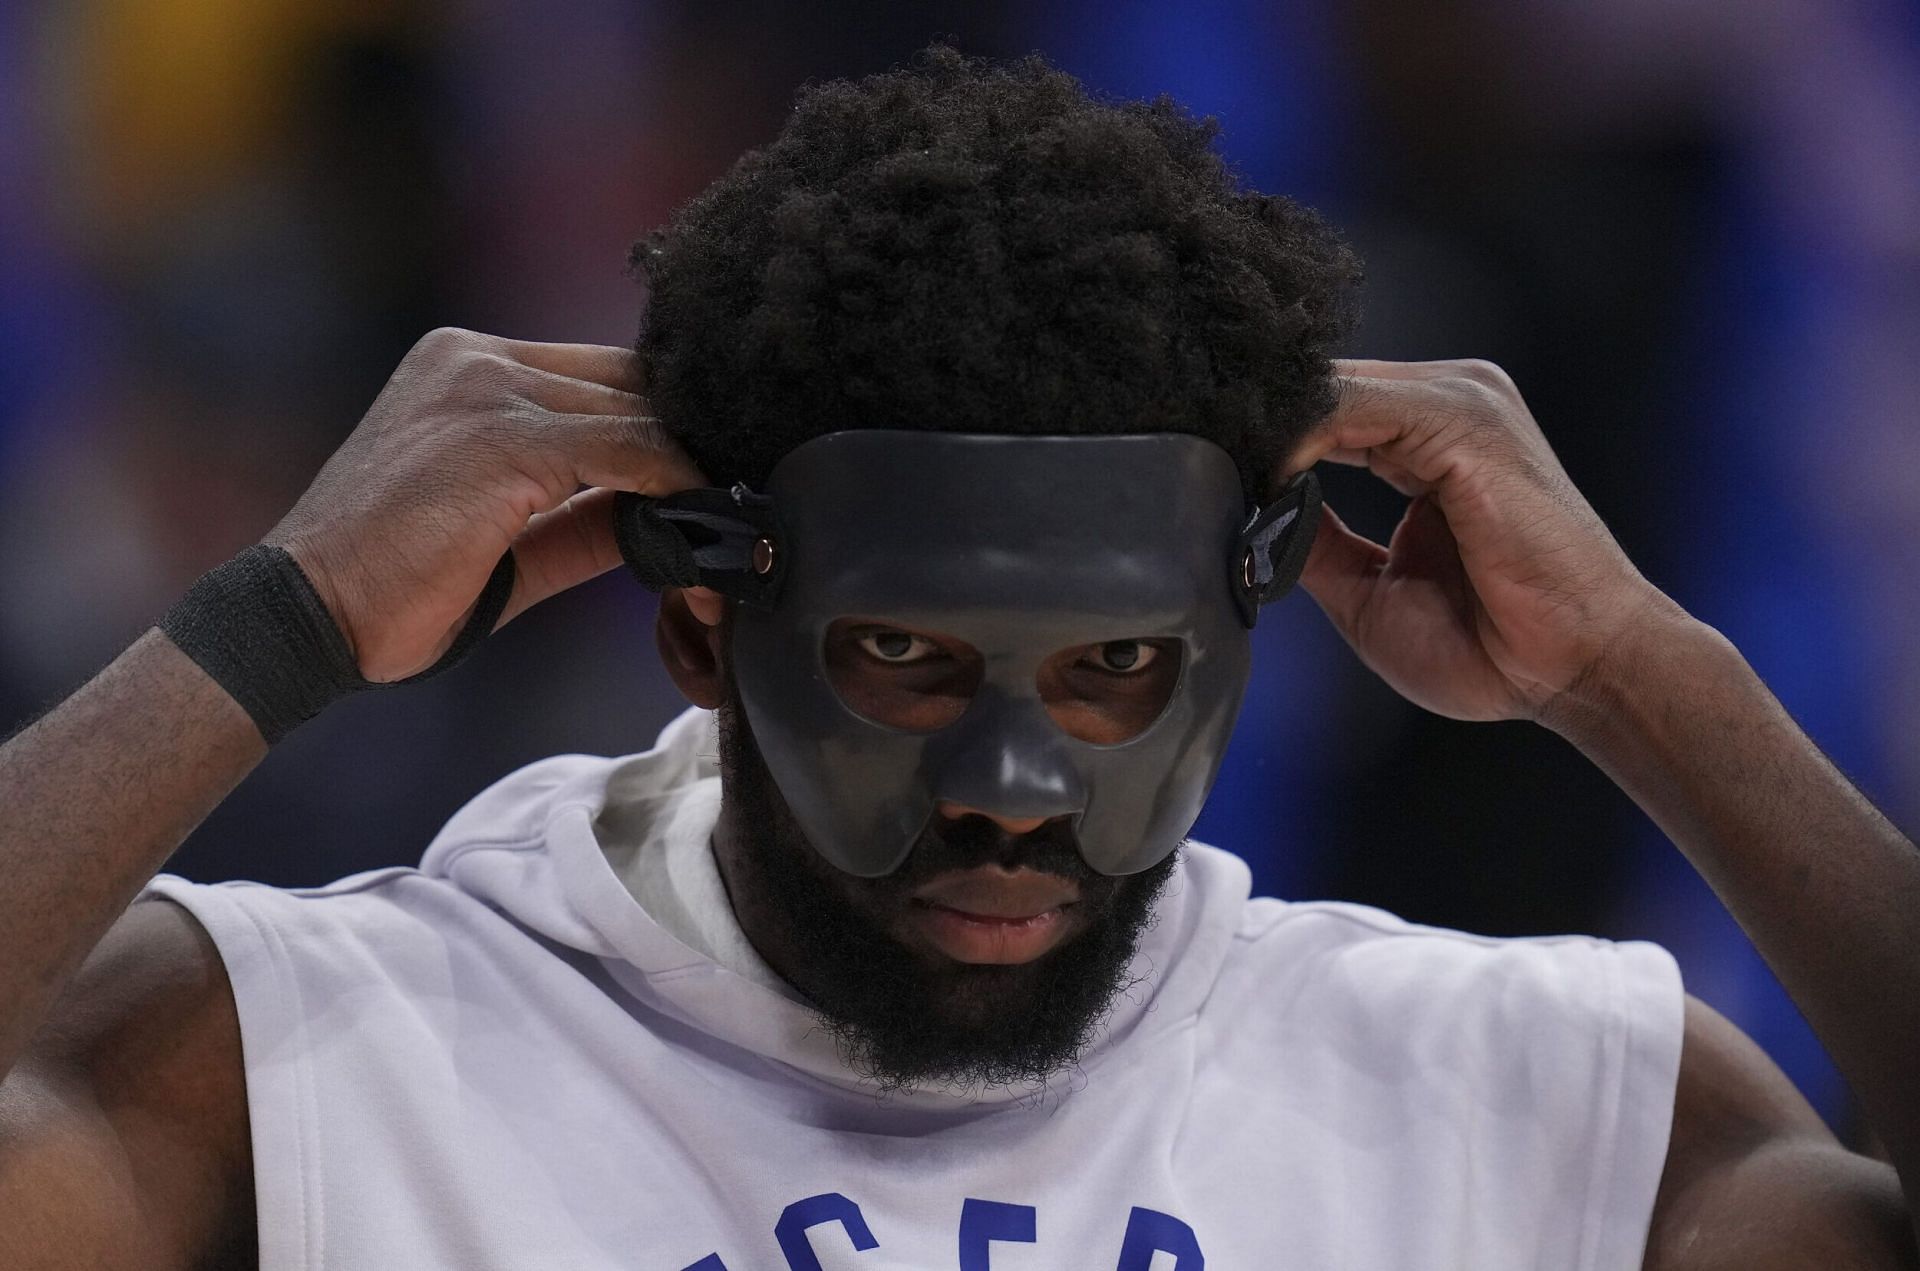 An injury-riddled and masked Joel Embiid just led the Philadelphia 76ers back into the series against the Miami Heat. [Photo: NBA.com]